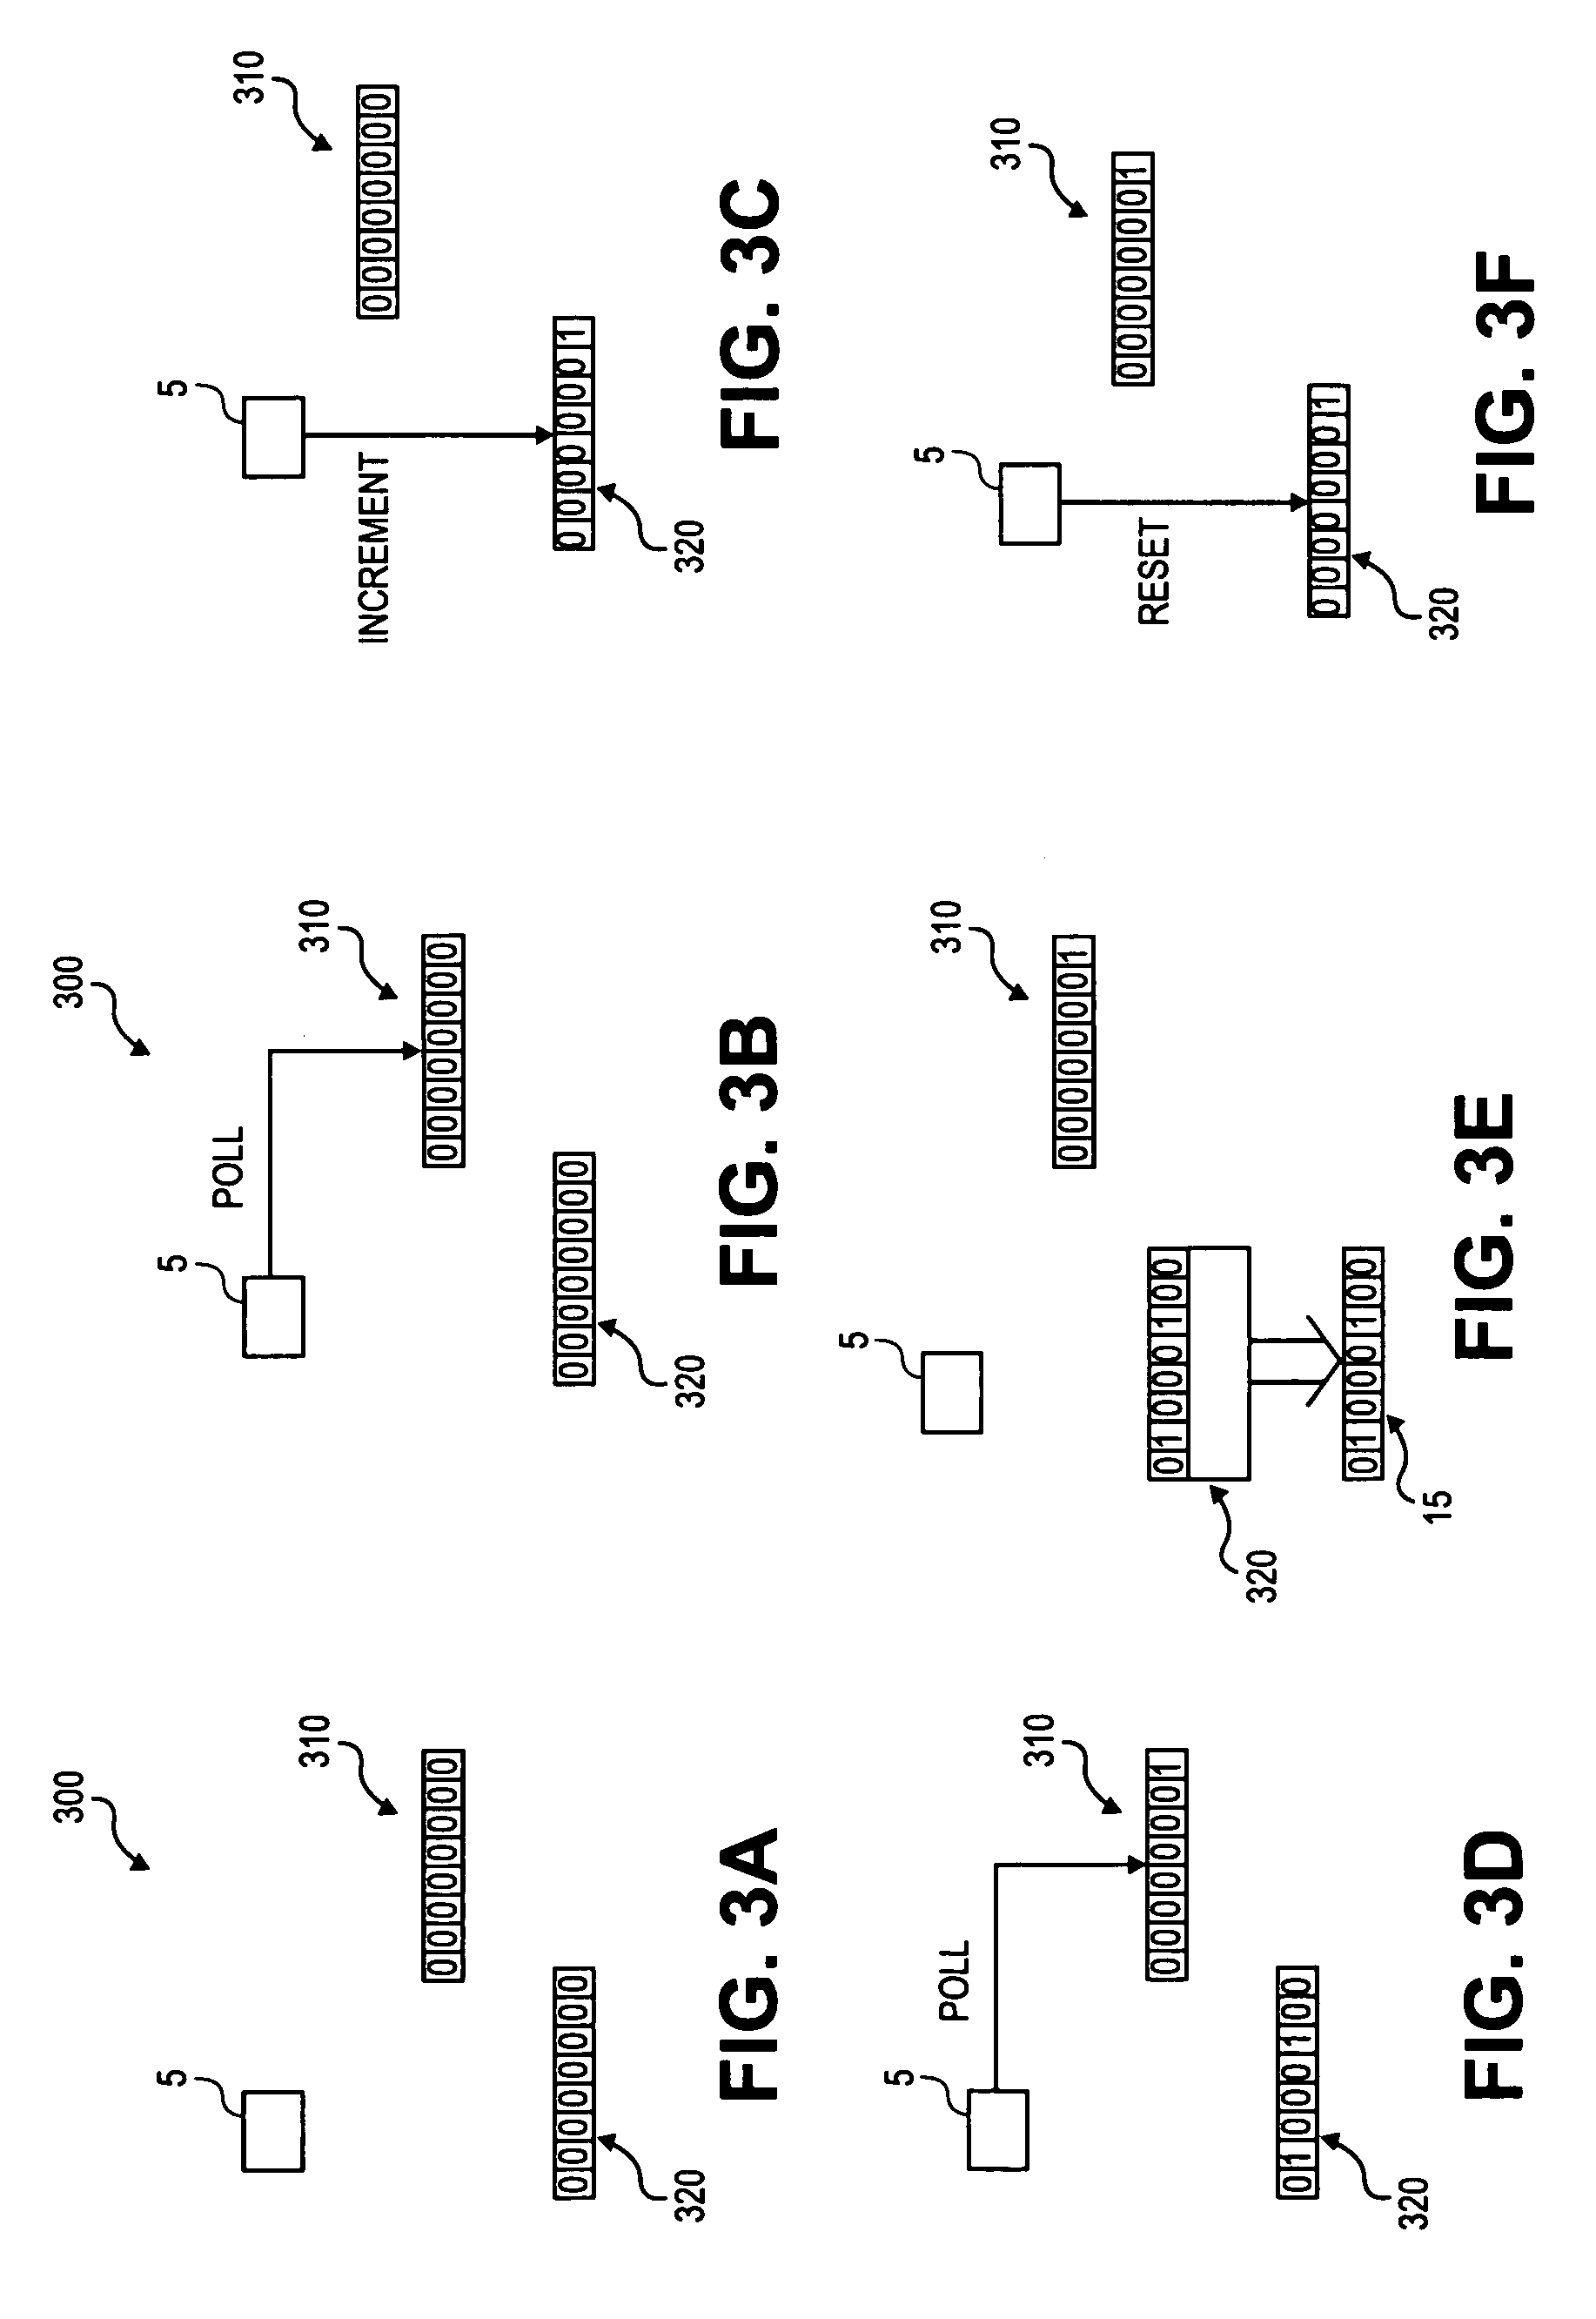 System and method for generating pseudo-random numbers